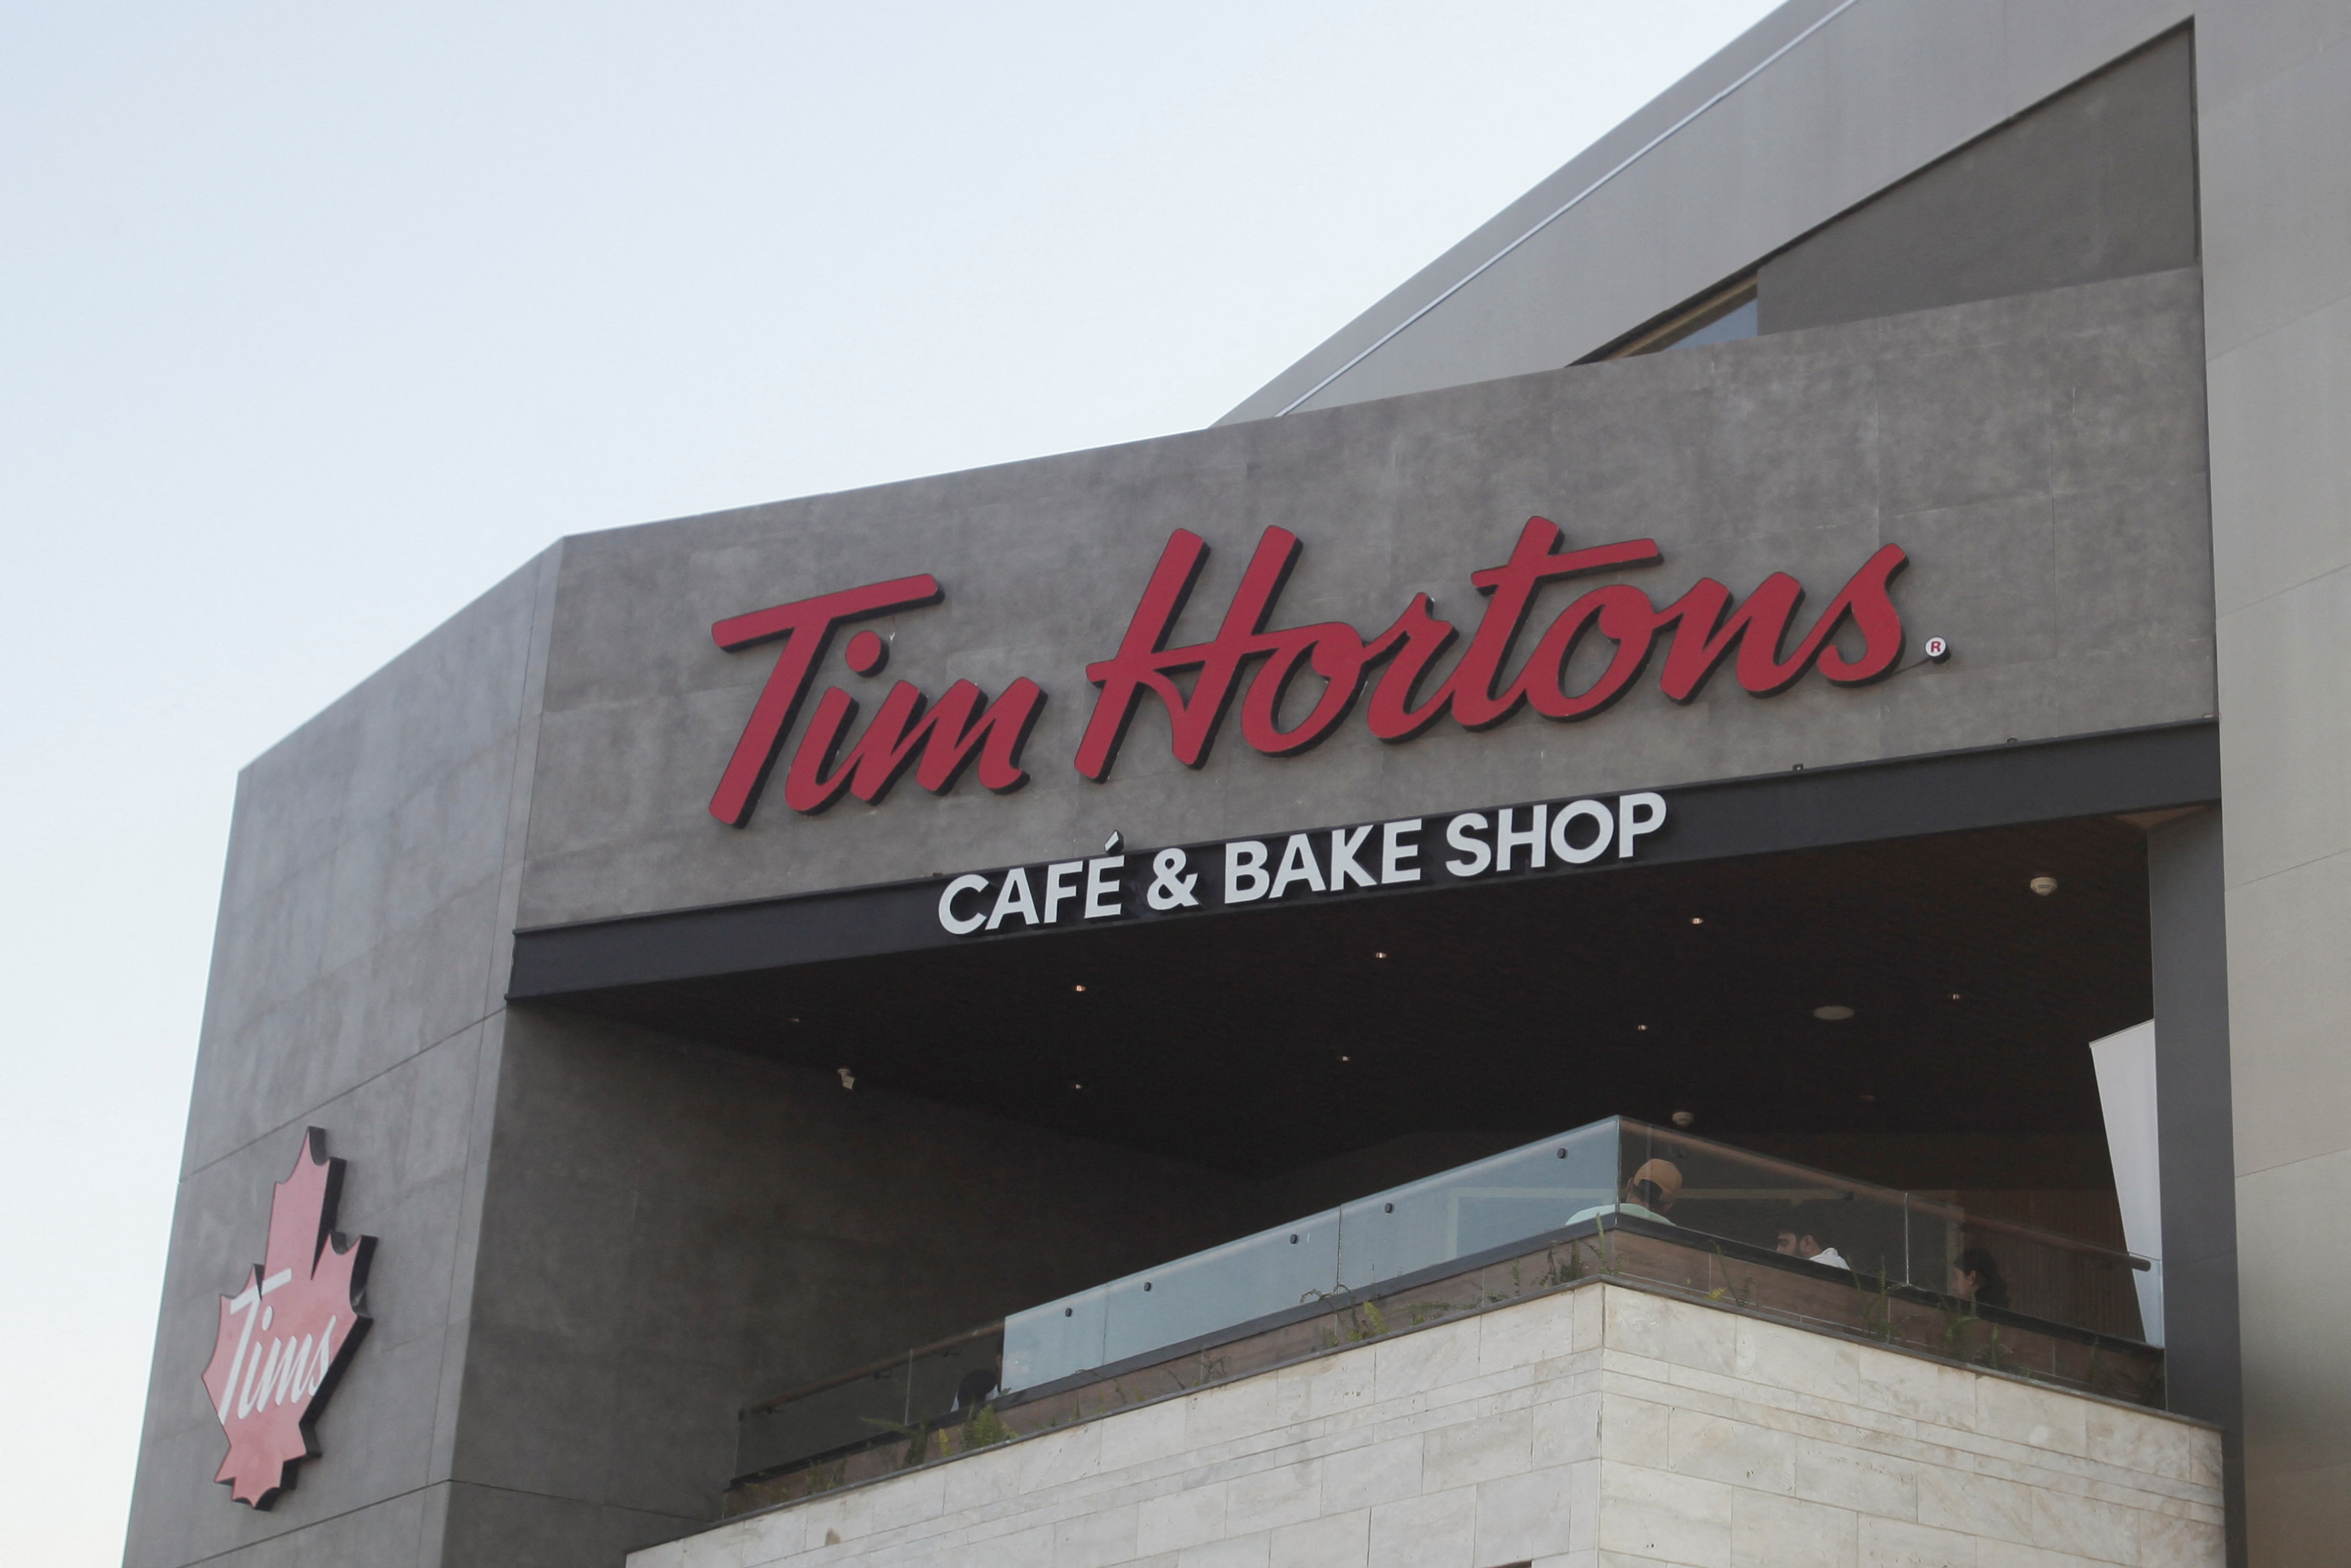 Tim Hortons takes on the world